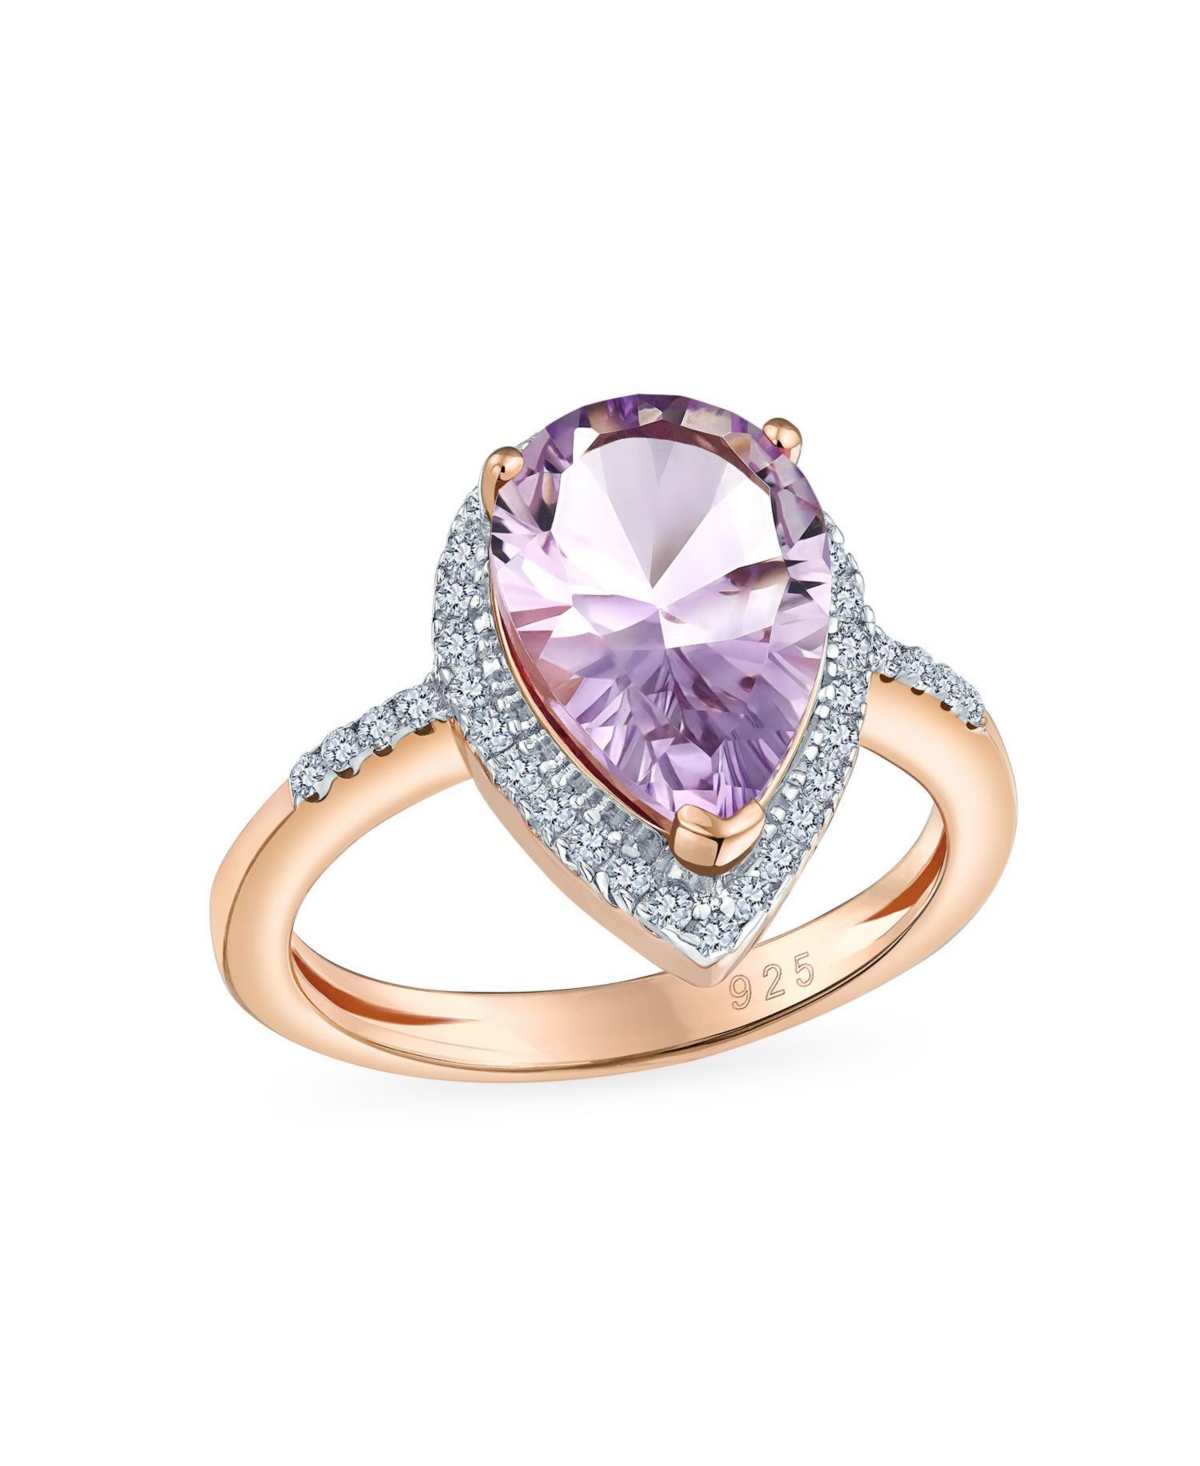 3.75CTW Zircon Pave Halo Pear Shape Teardrop Gemstone Engagement Ring Pink Amethyst Statement Ring Rose Gold Overlay .925 Sterling Silve